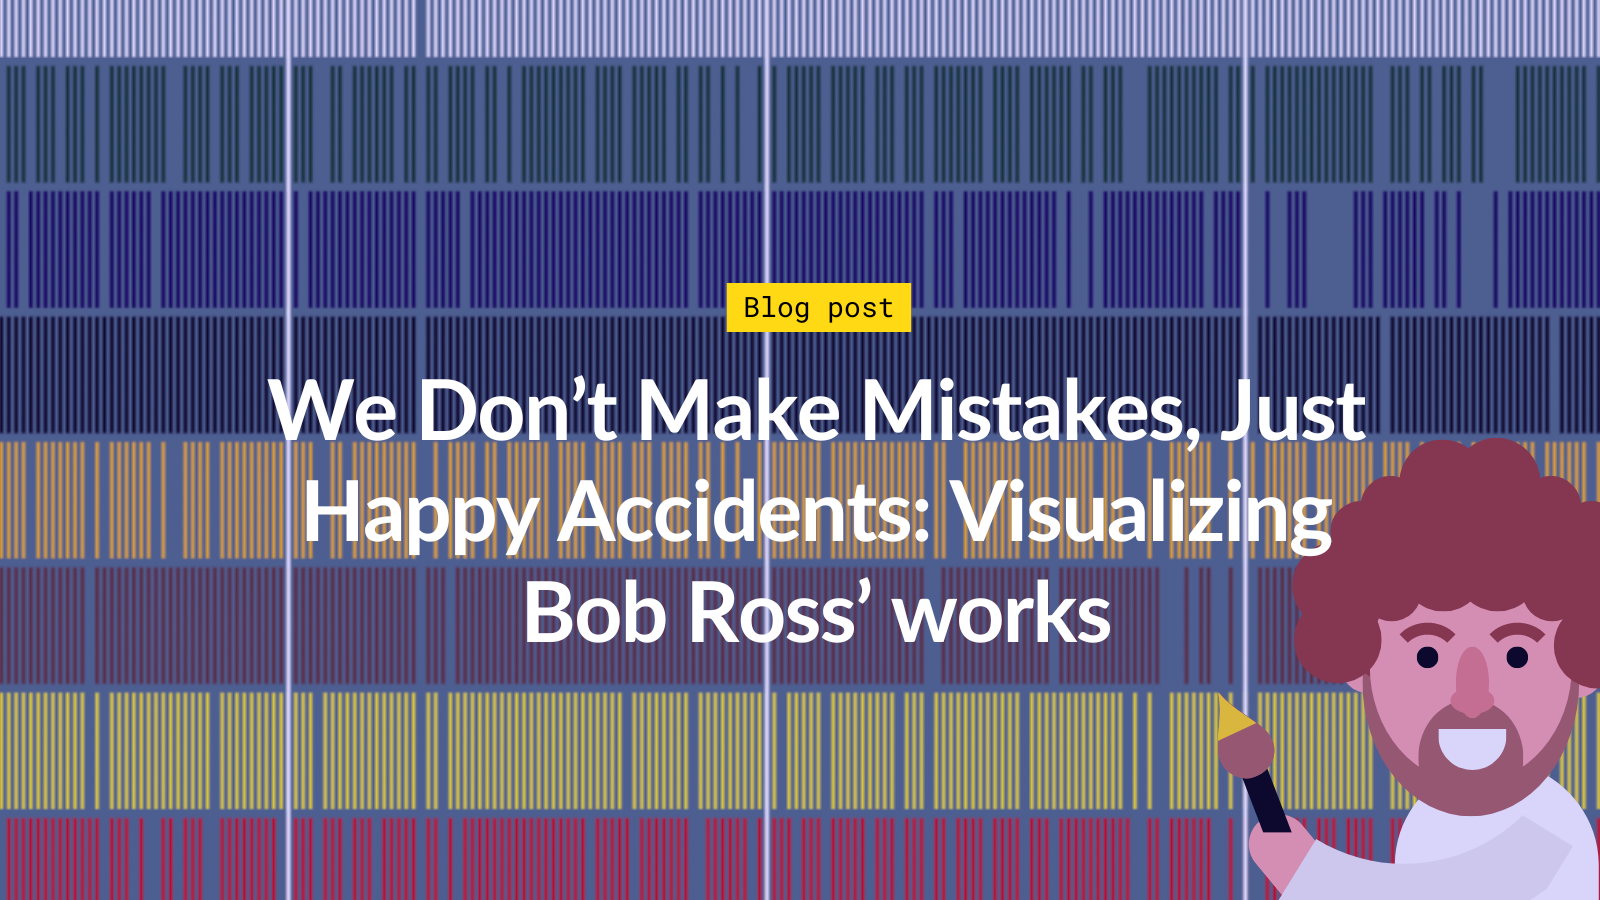 A Statistical Analysis of the Work of Bob Ross